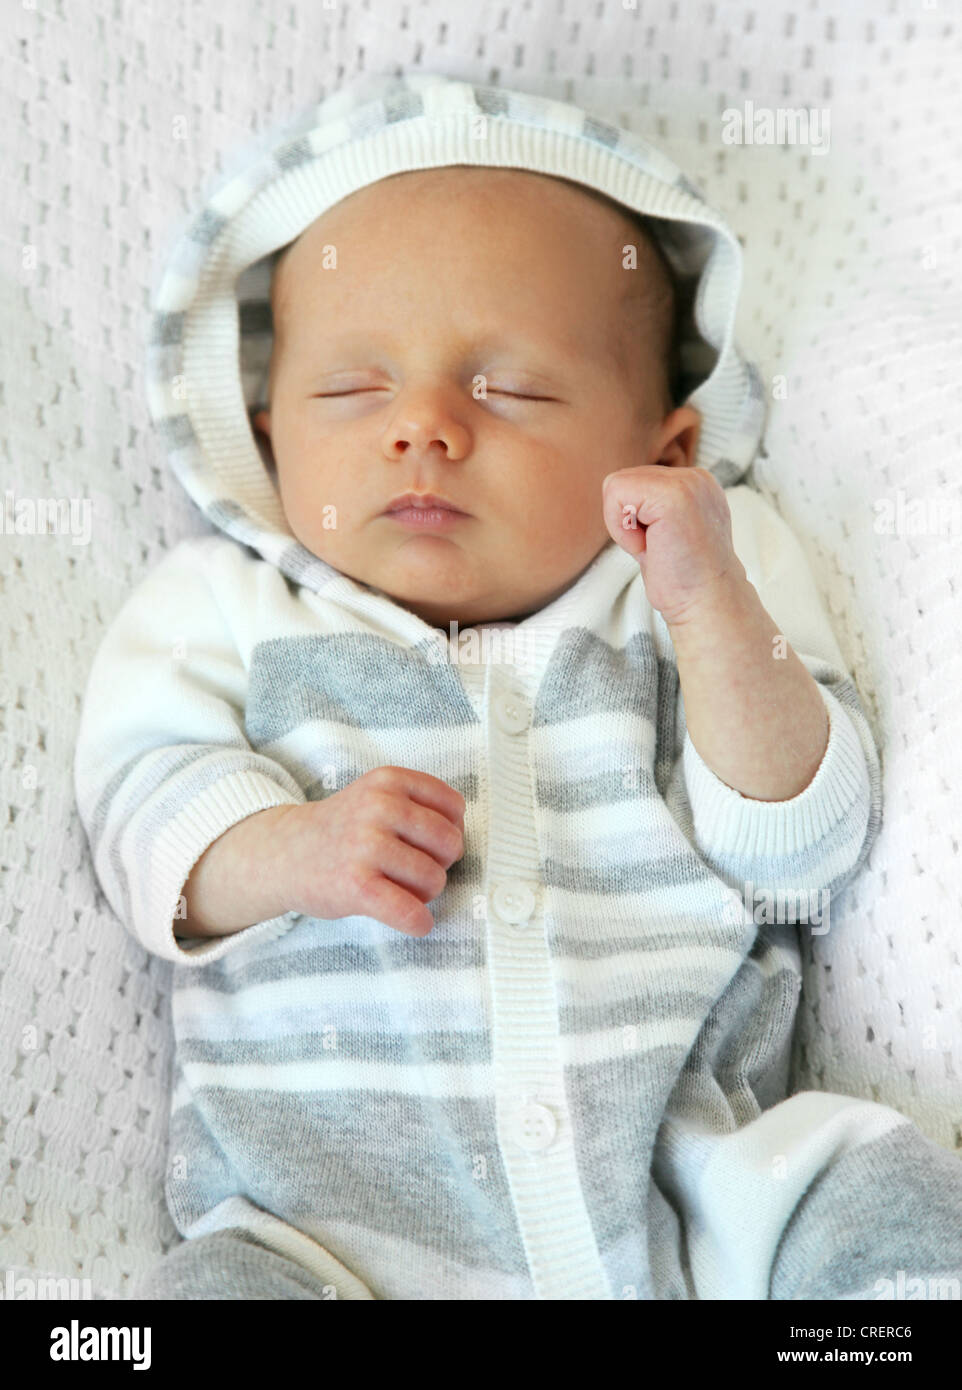 5 week old baby sleeping on its back in a striped hooded outfit Stock Photo